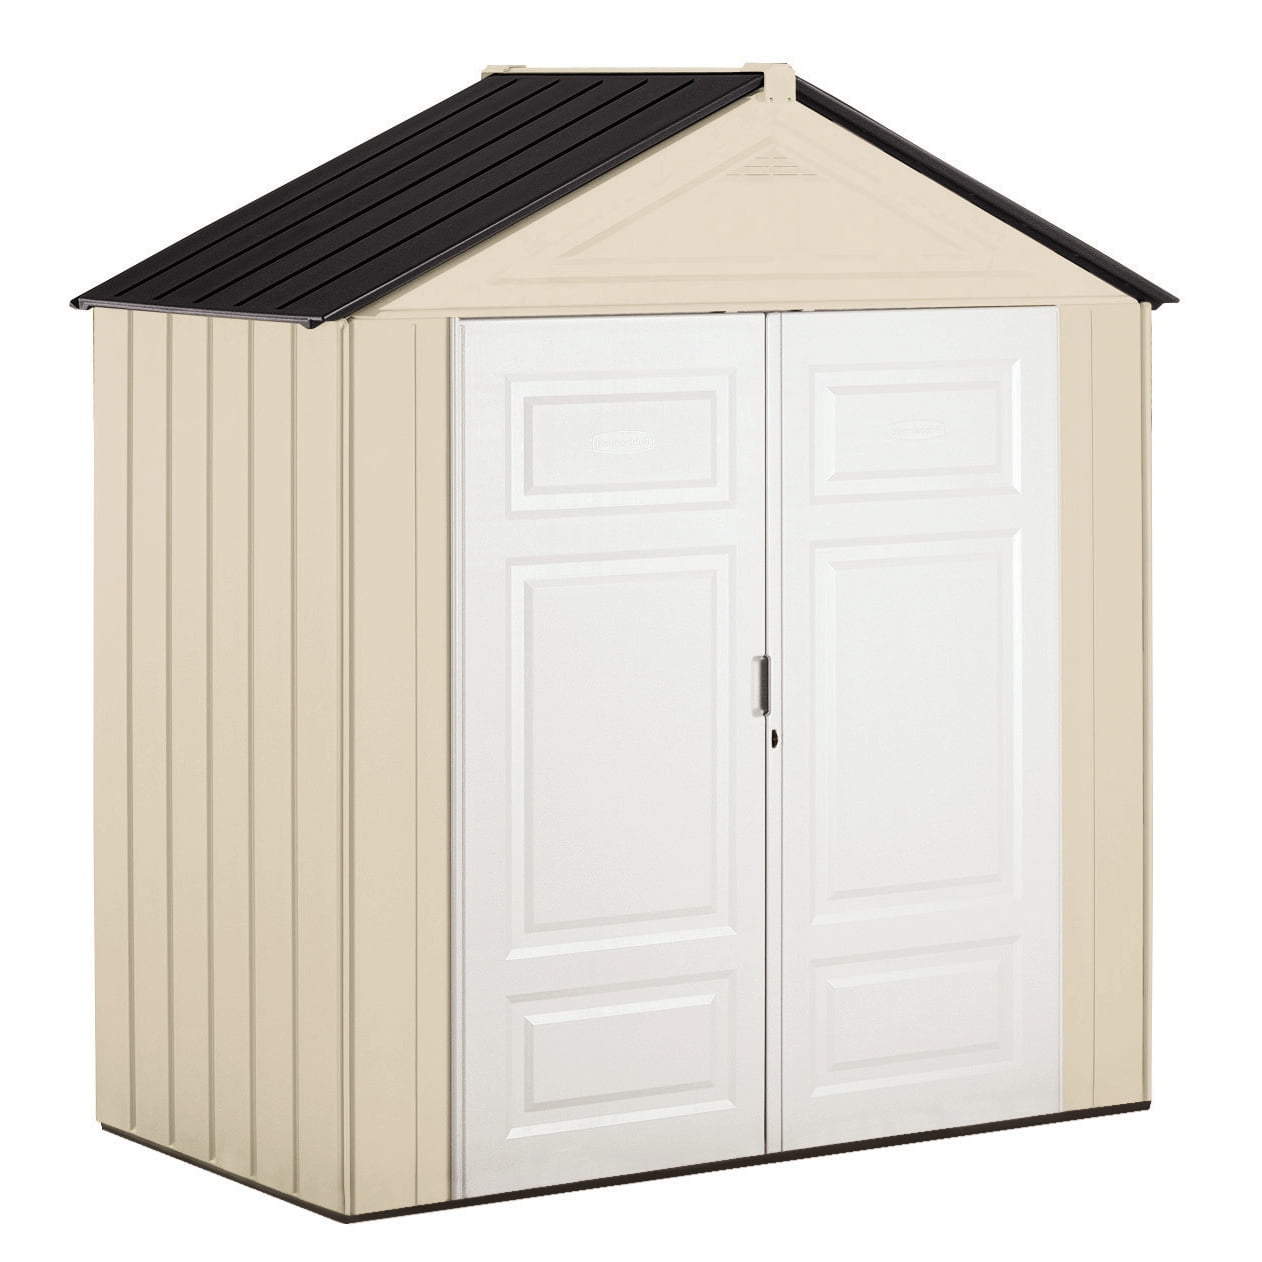 rubbermaid 3 x 7 ft resin storage shed, sandstone & onyx